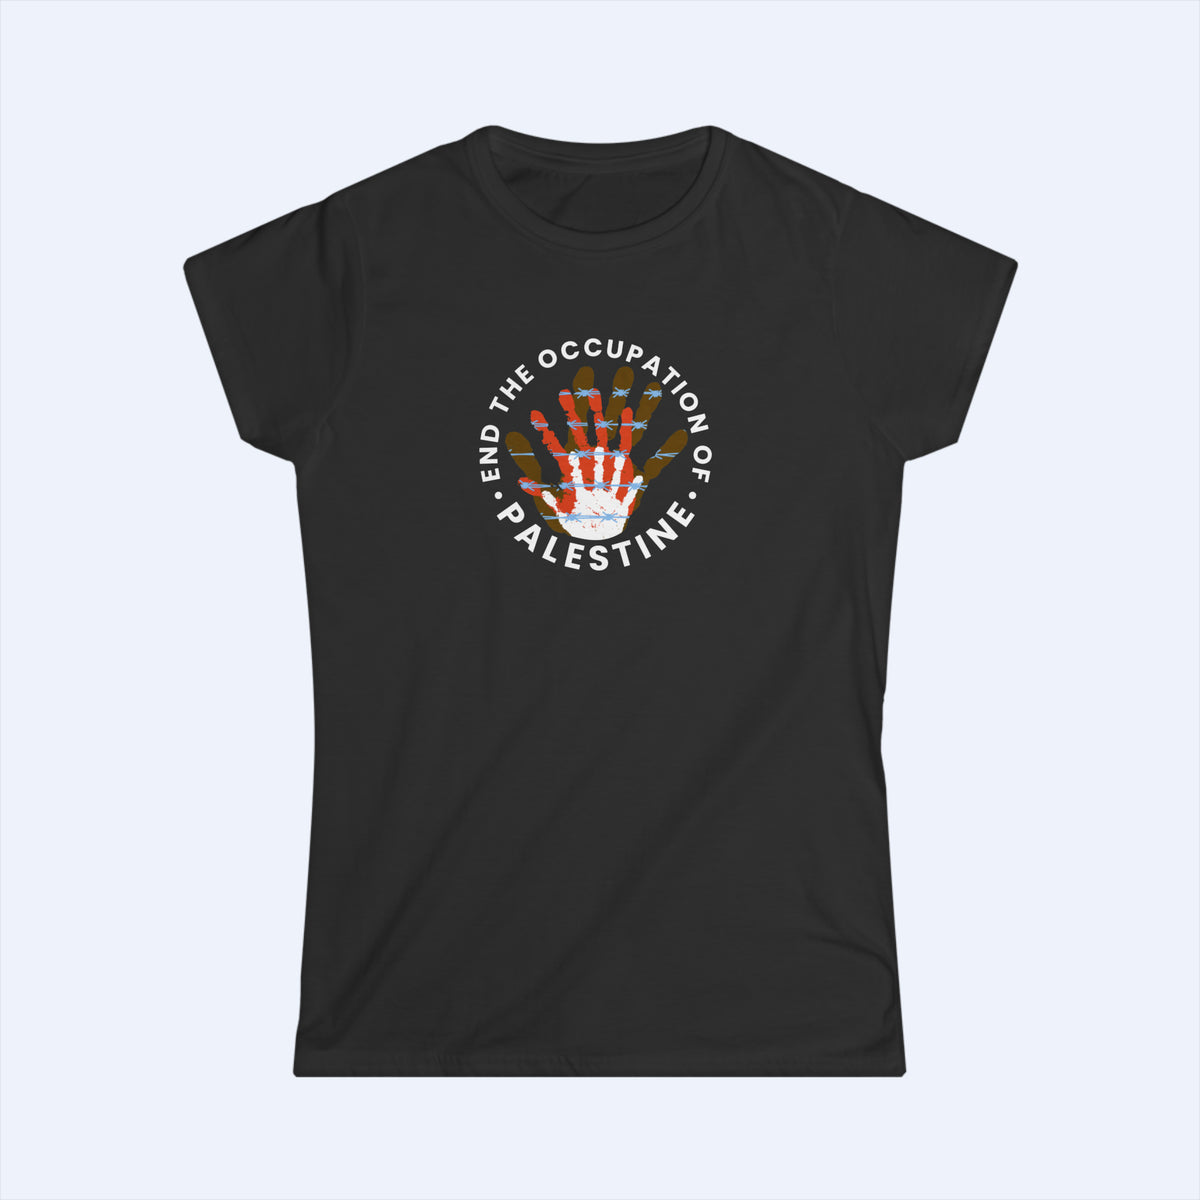 End Occupation Women DBK WH Tee